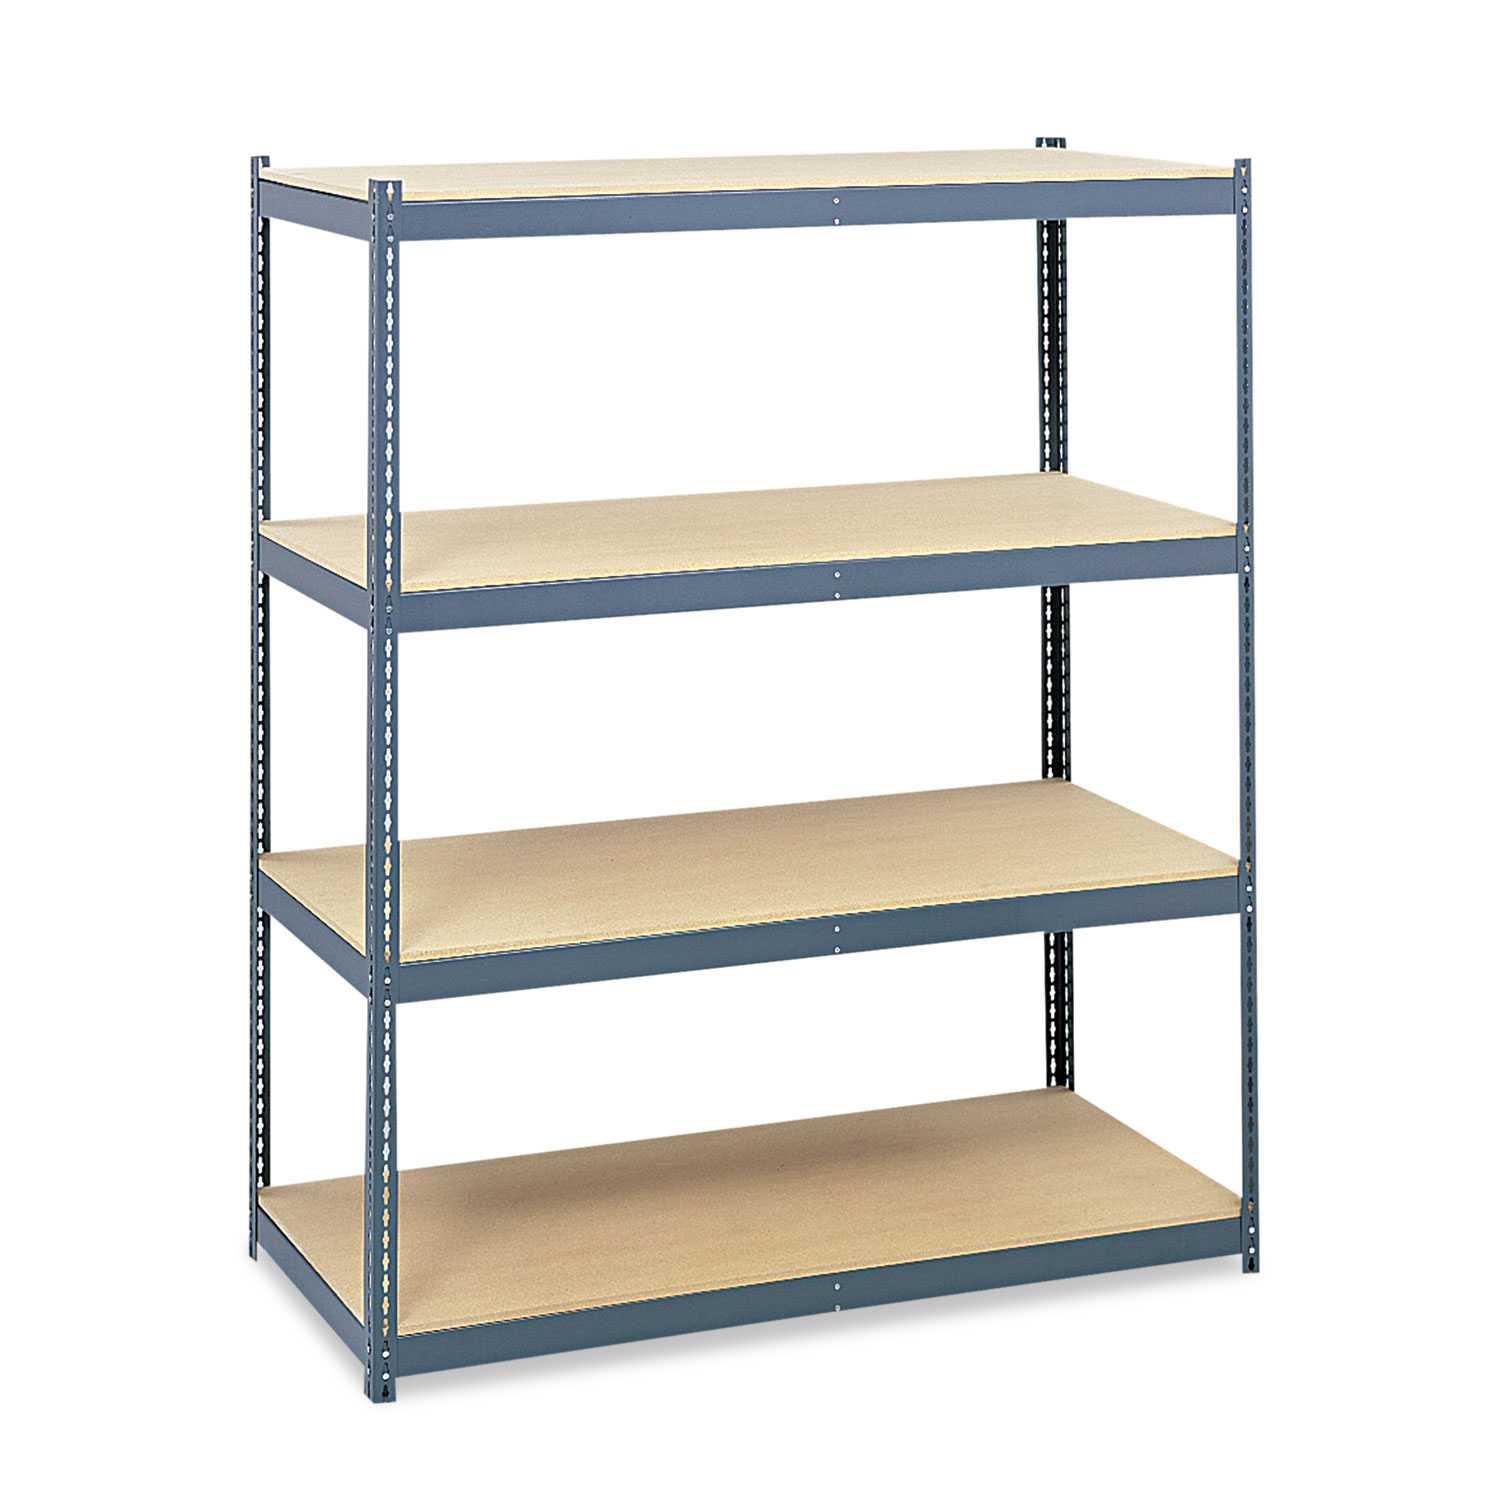  Safco 5260 Steel Pack Archival Shelving, 69w x 33d x 84h, Gray (SAF5260) 